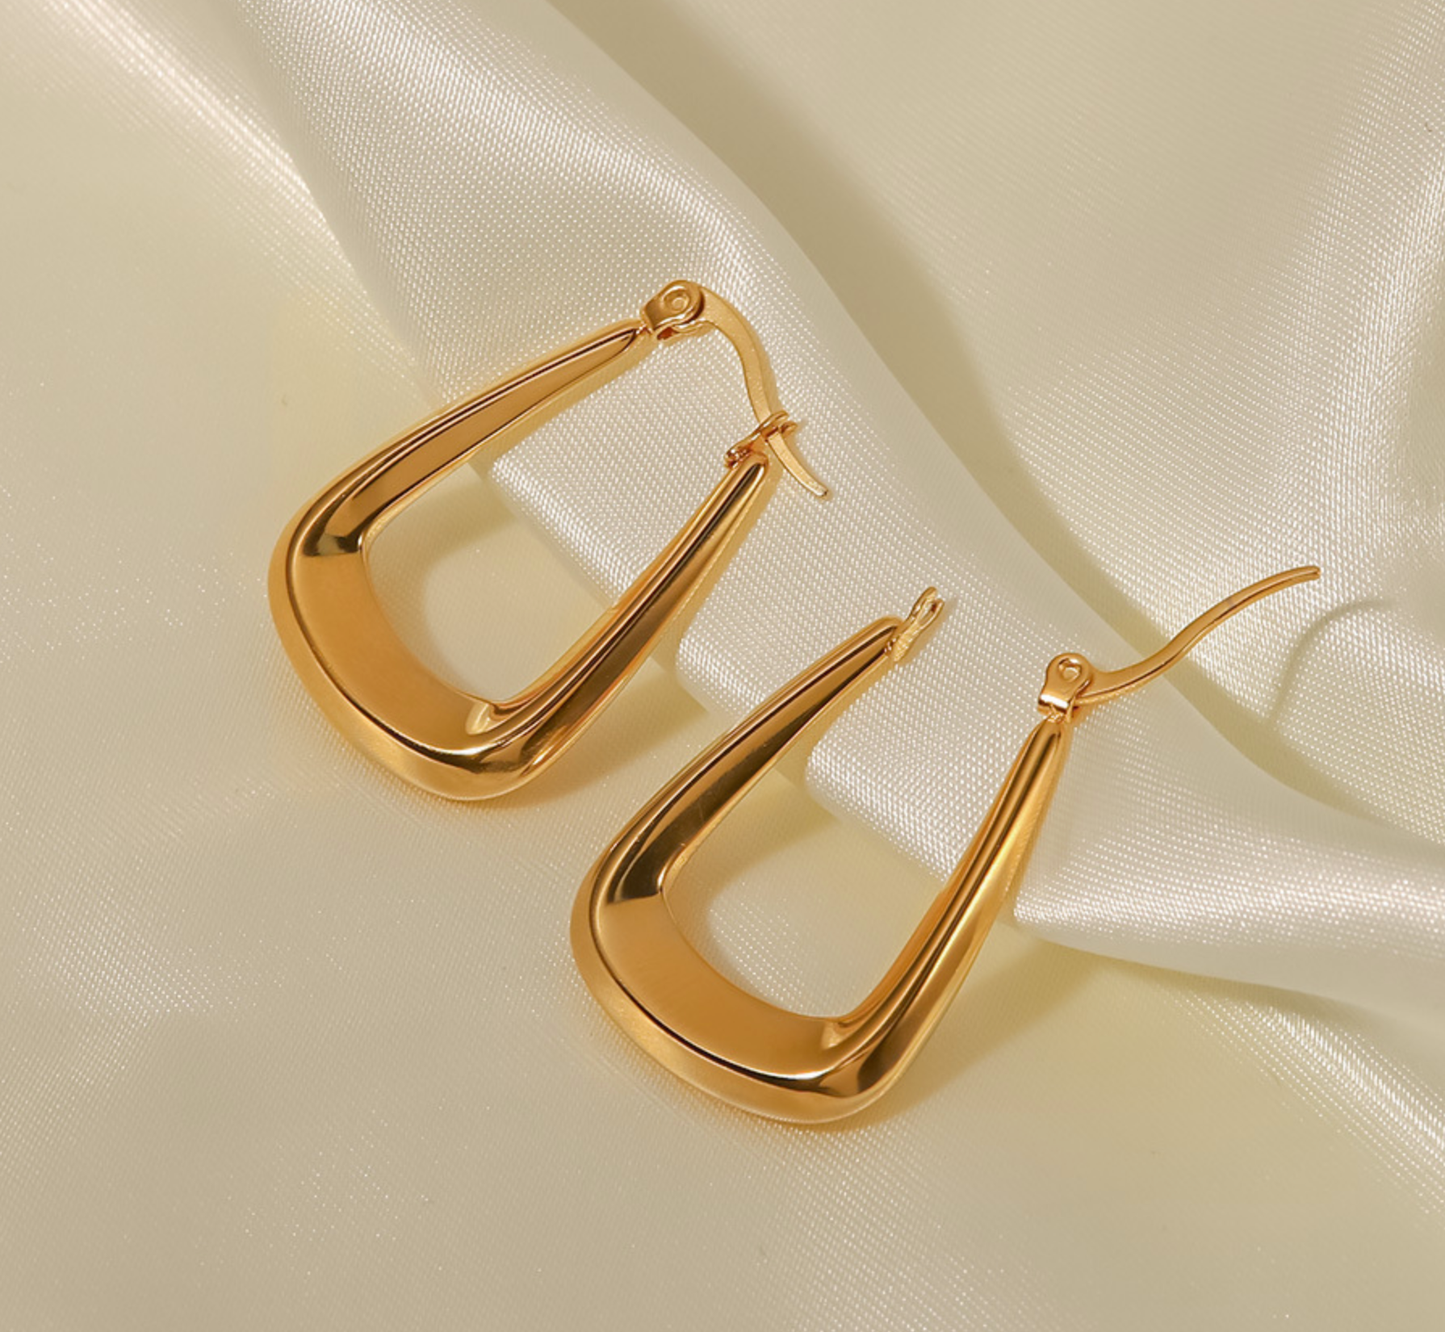 A pair of 18K gold plated hoop earrings in a WS-Trapezoid style by 3Souls Company.